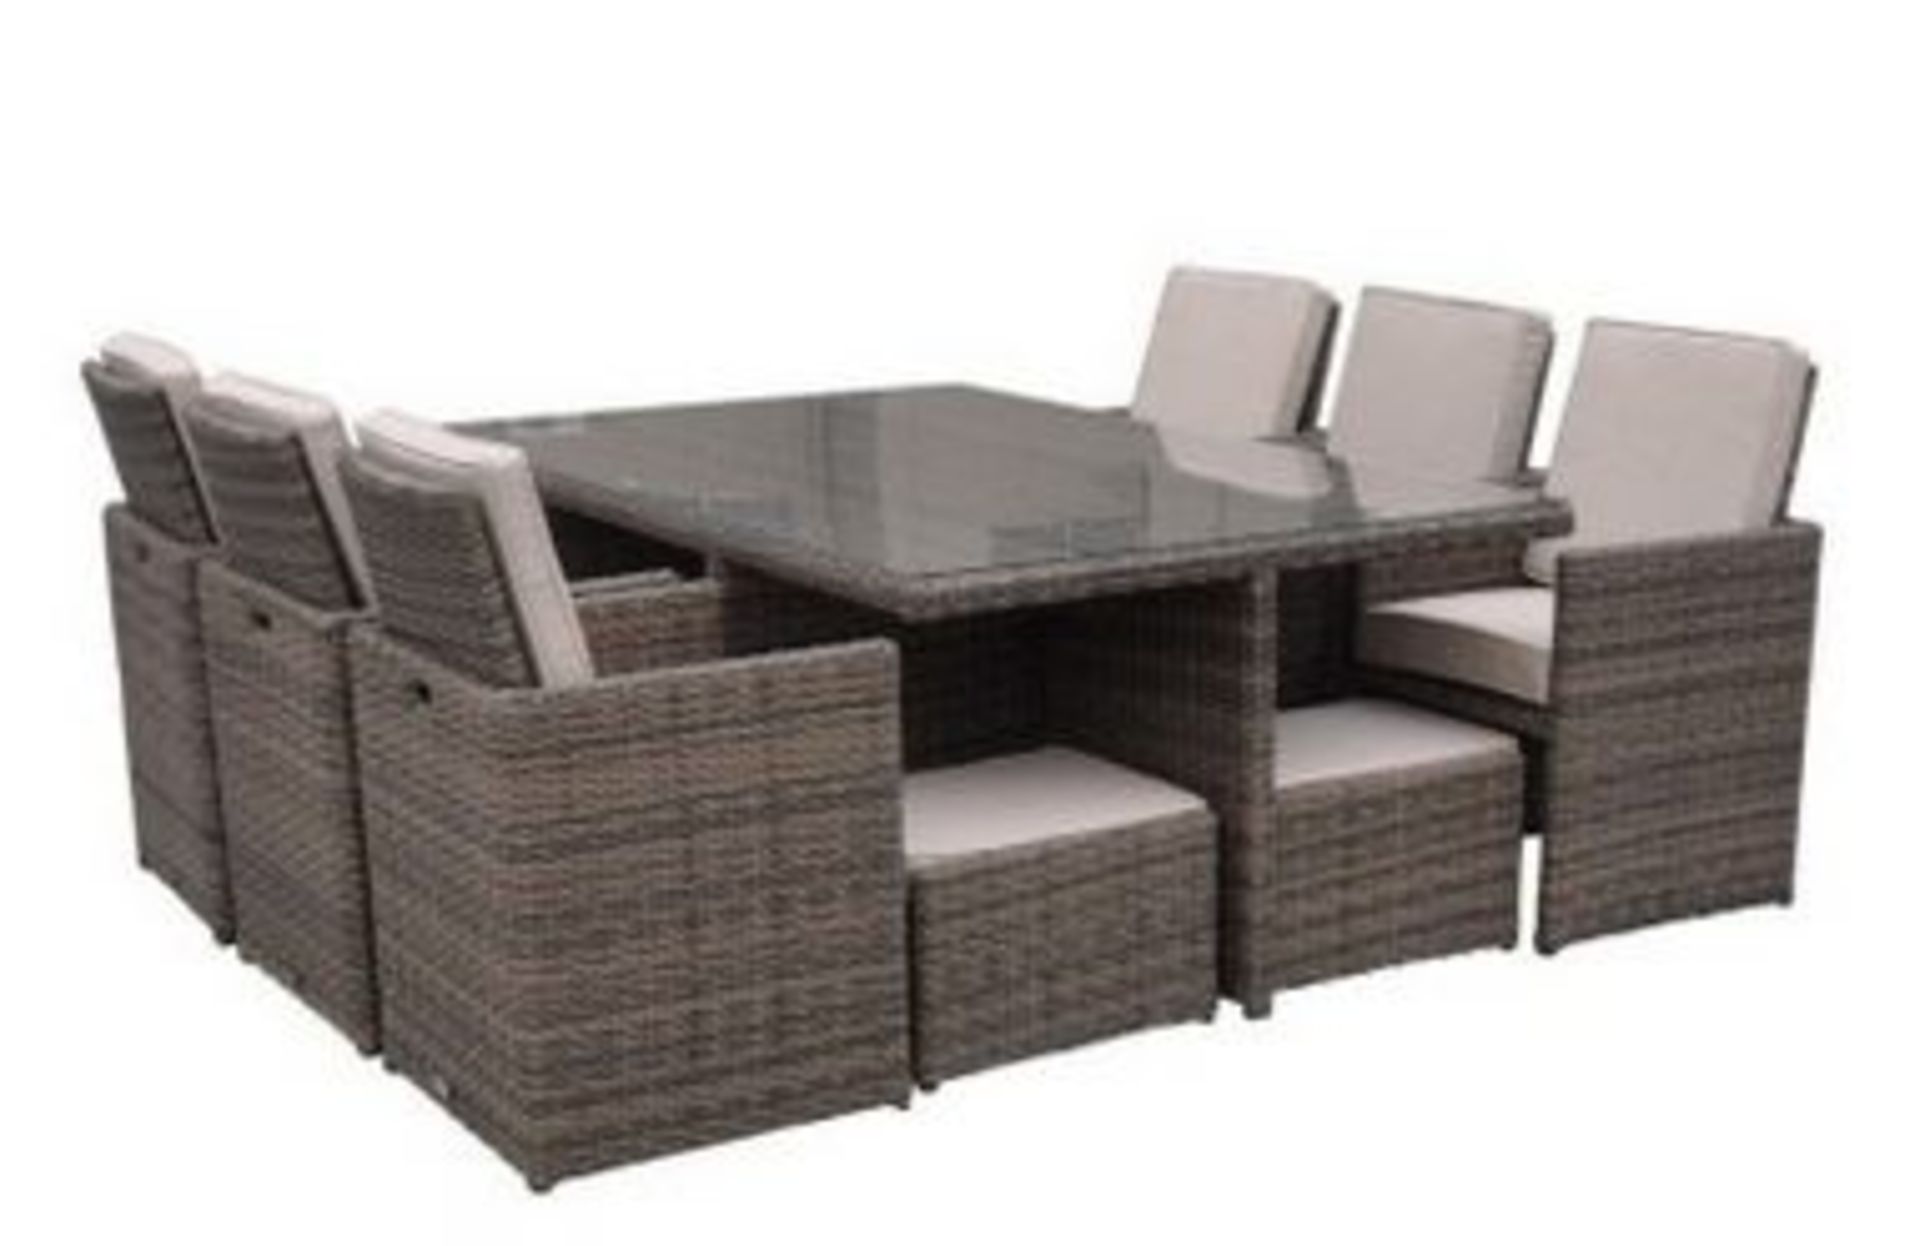 * Barcelona 7 Piece All Weather Rattan Cube Set in Truffle and Champagne online sale price £999. All